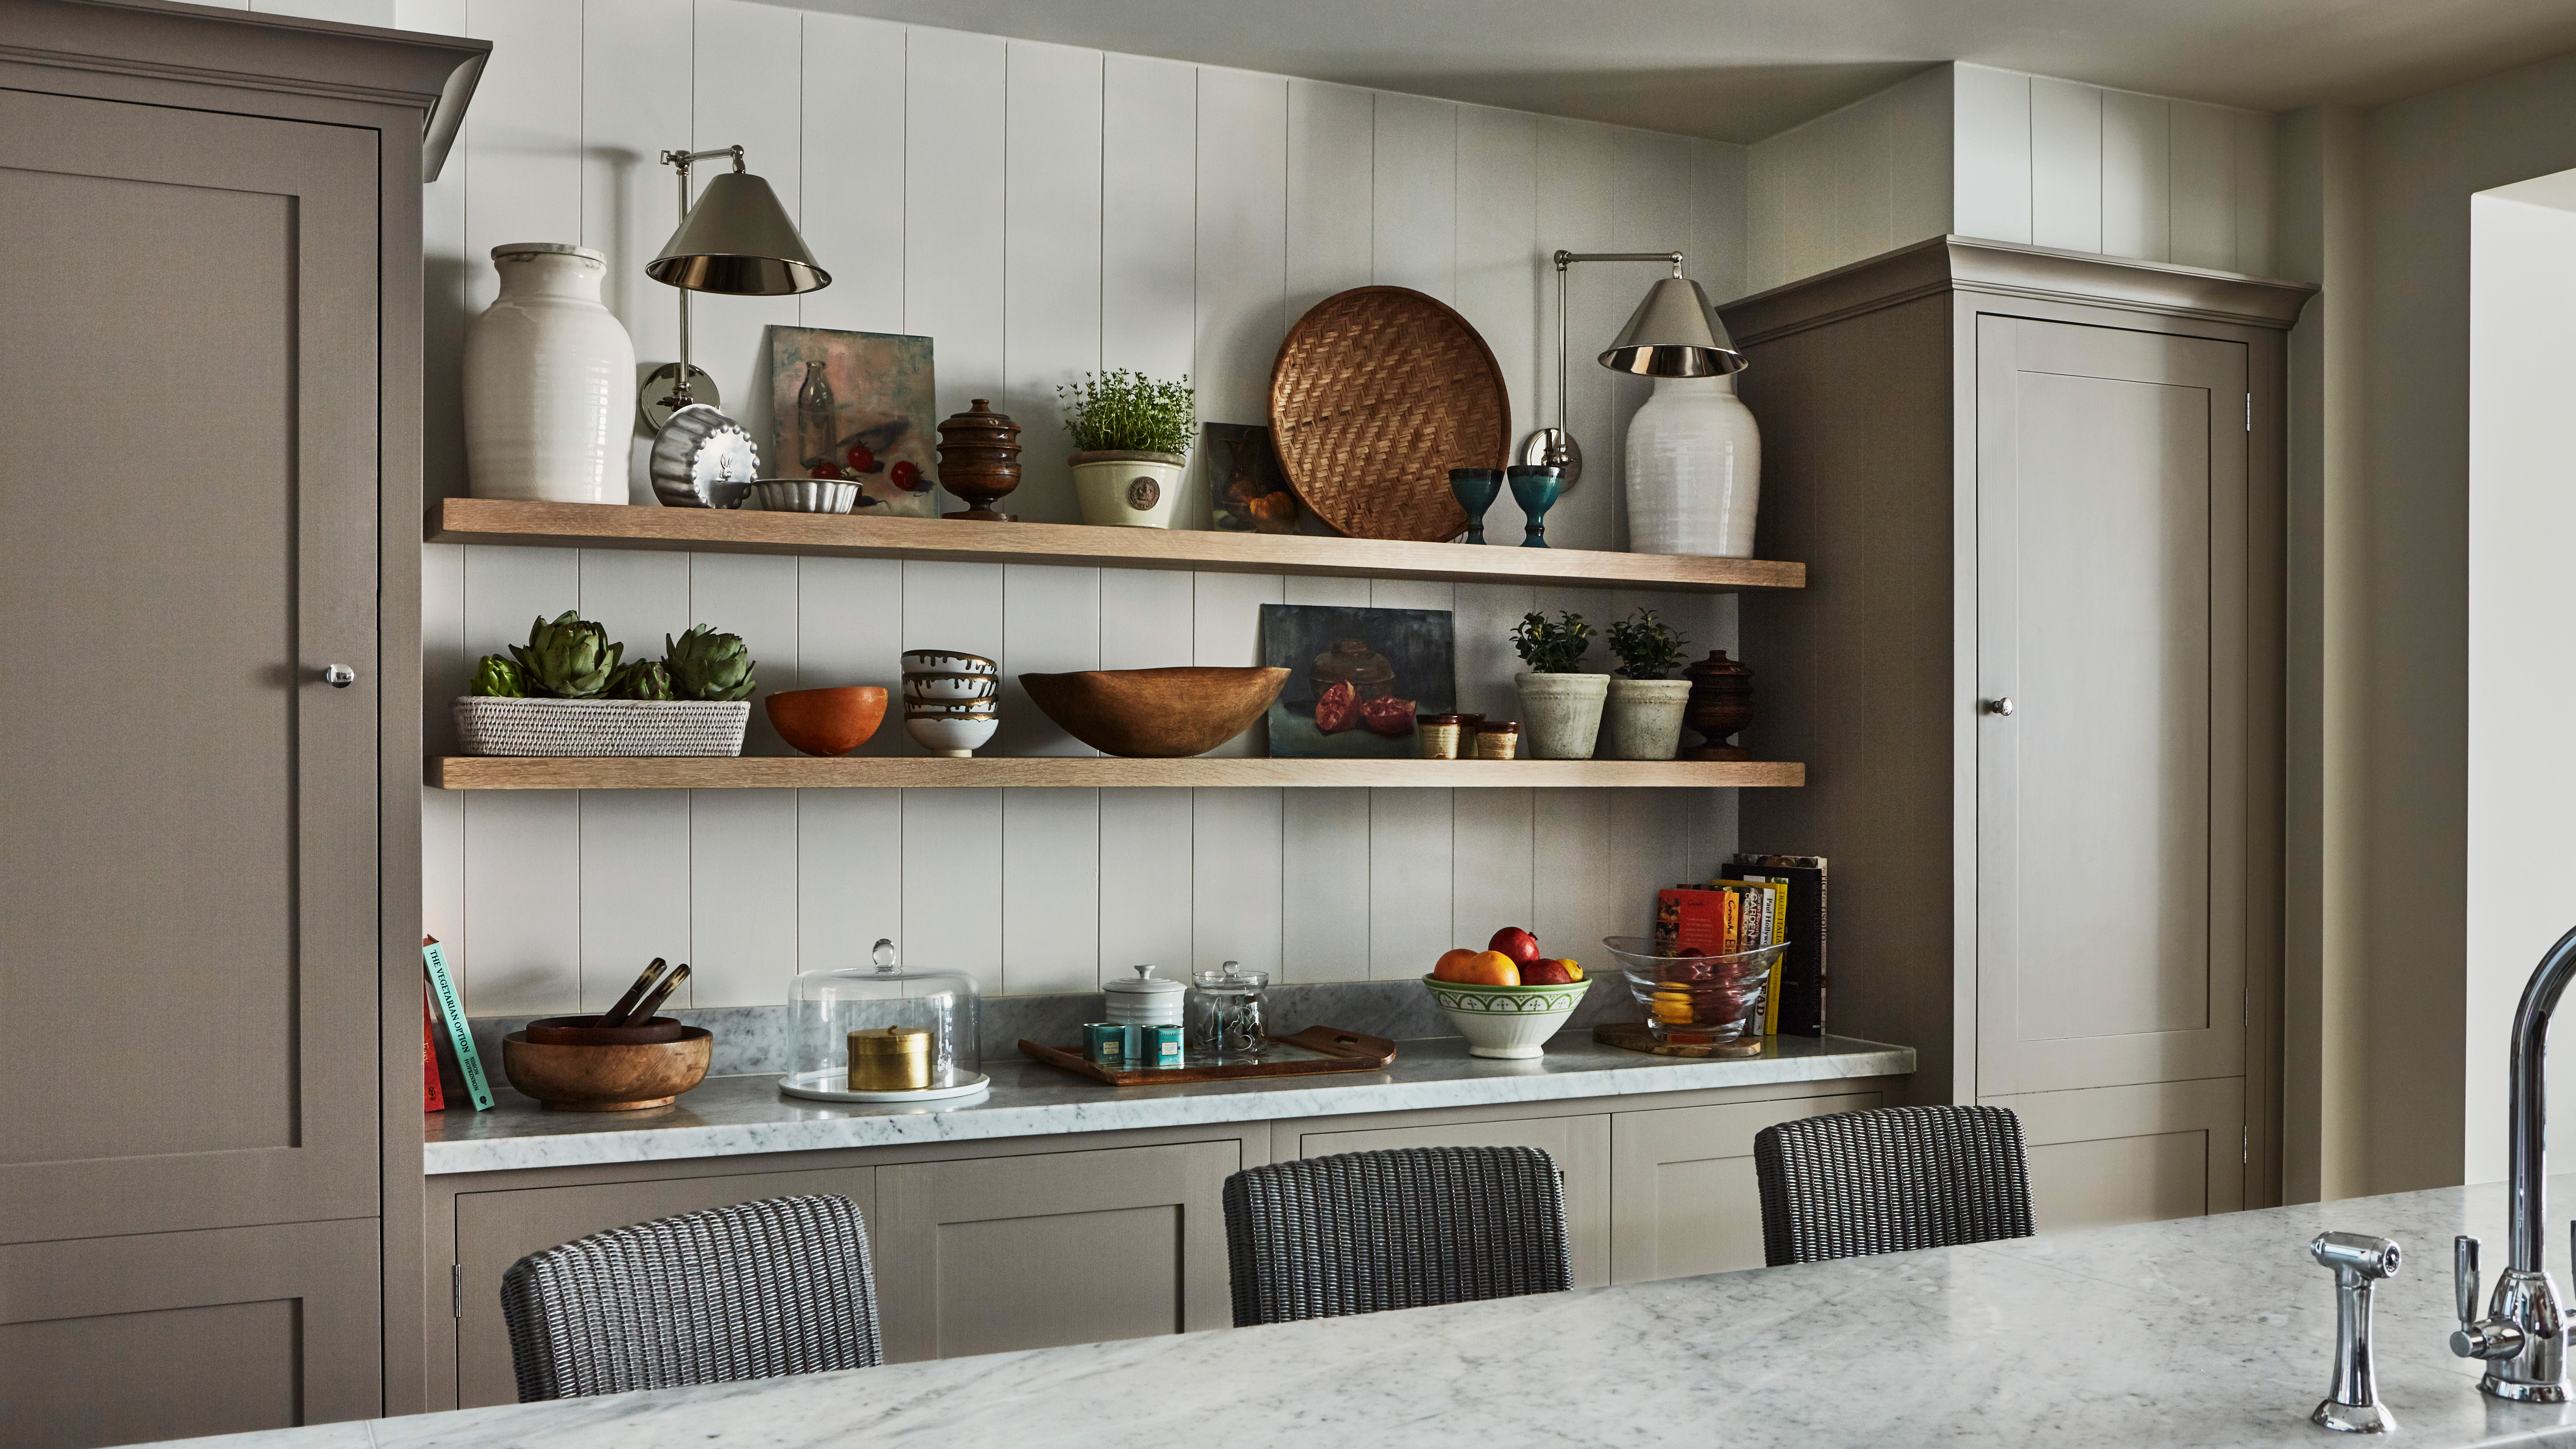 Kitchen Shelving Ideas 14 Ways To, How To Add Extra Shelves Kitchen Cabinets